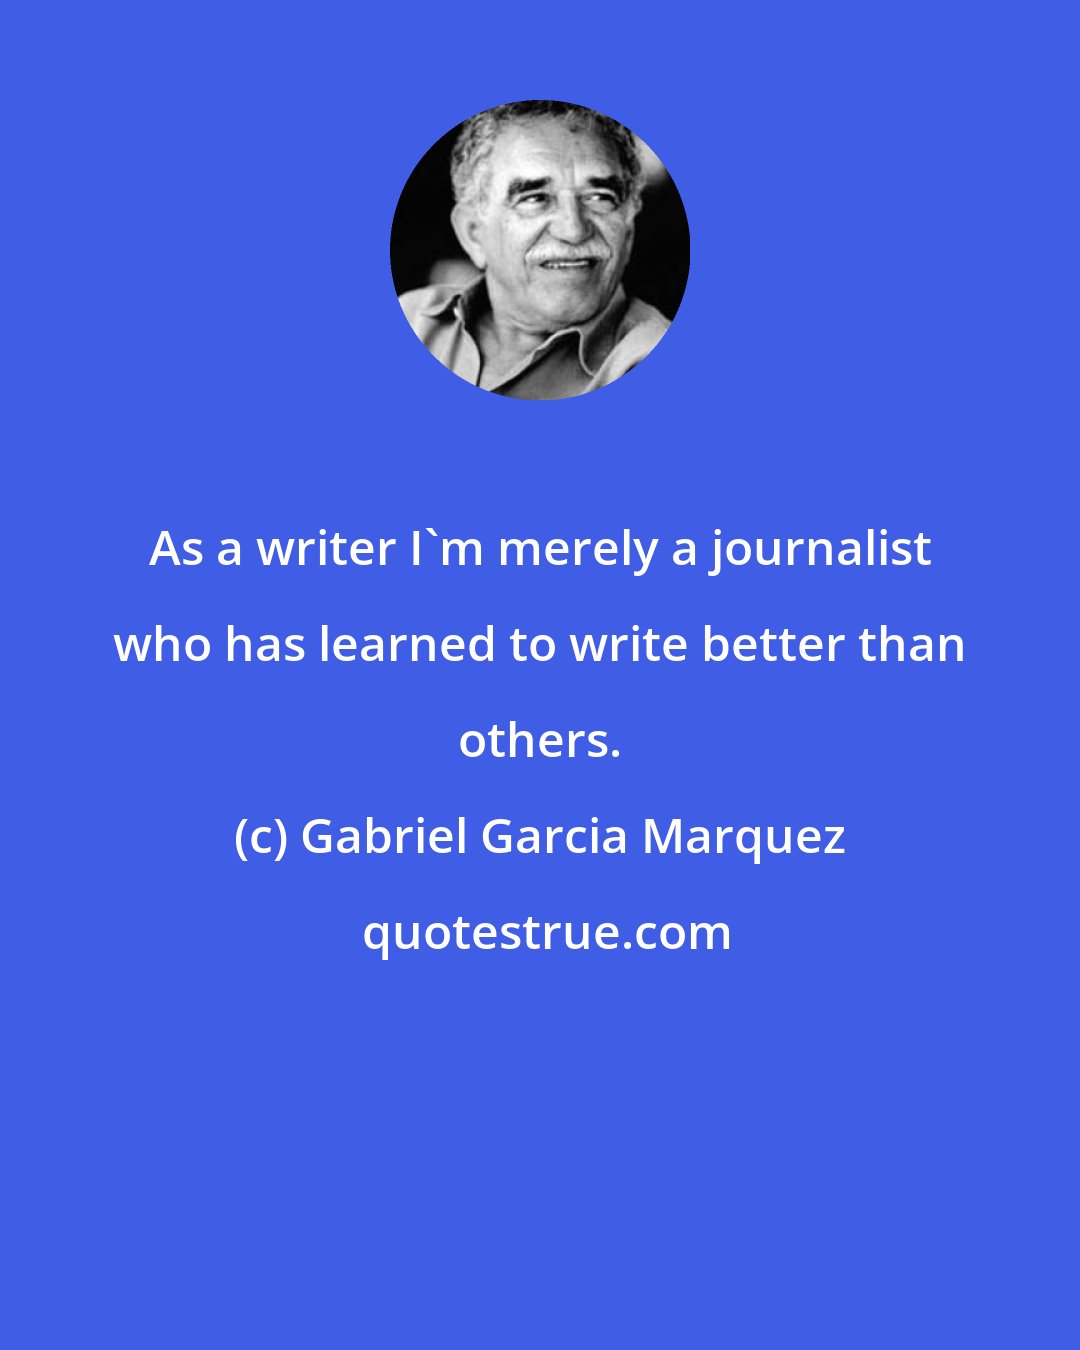 Gabriel Garcia Marquez: As a writer I'm merely a journalist who has learned to write better than others.